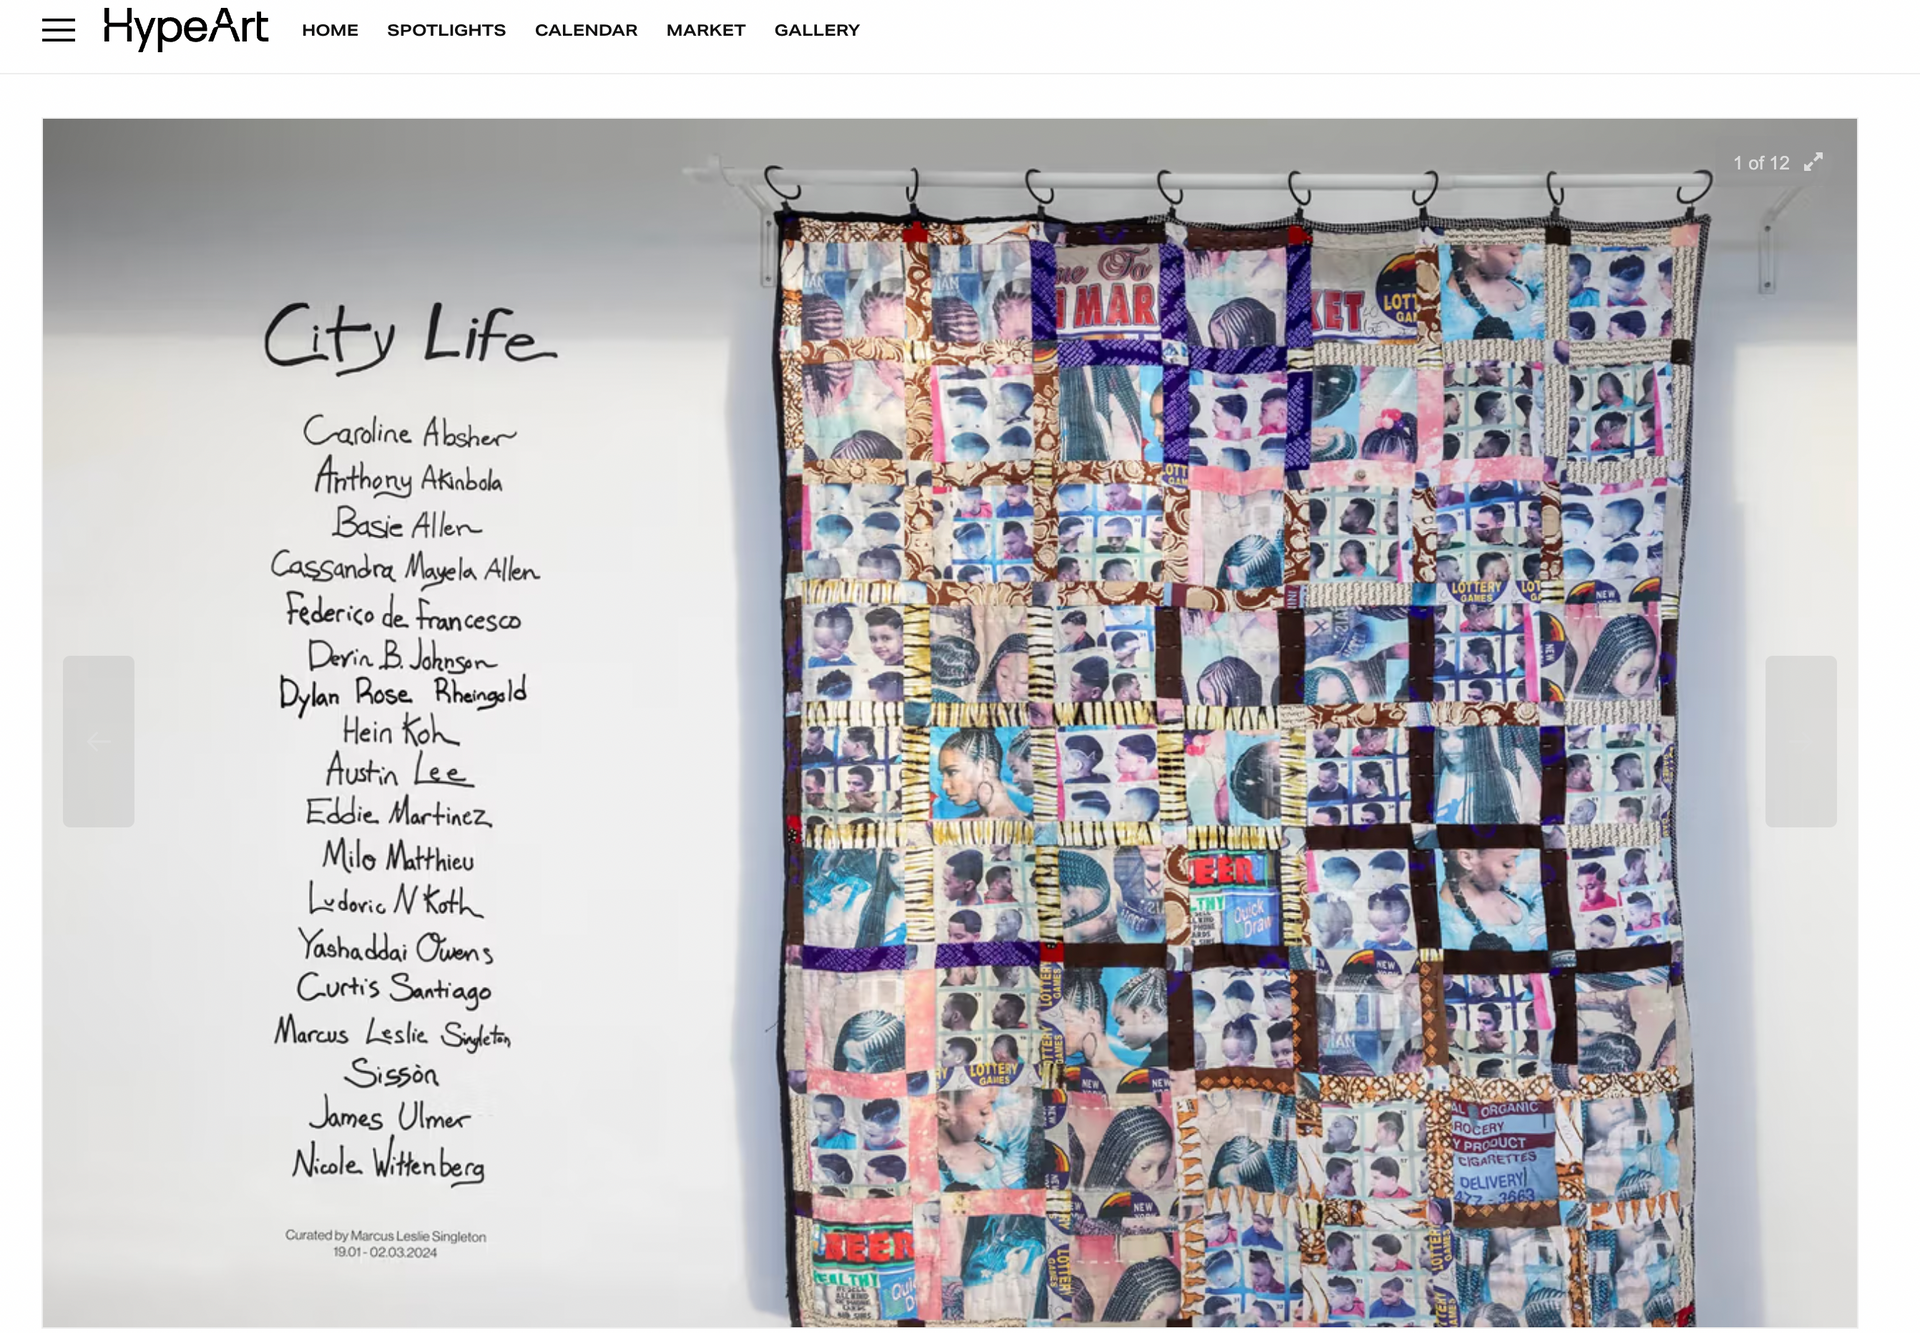 HypeArt features City Life, a group exhibition curated by Marcus Leslie Singleton